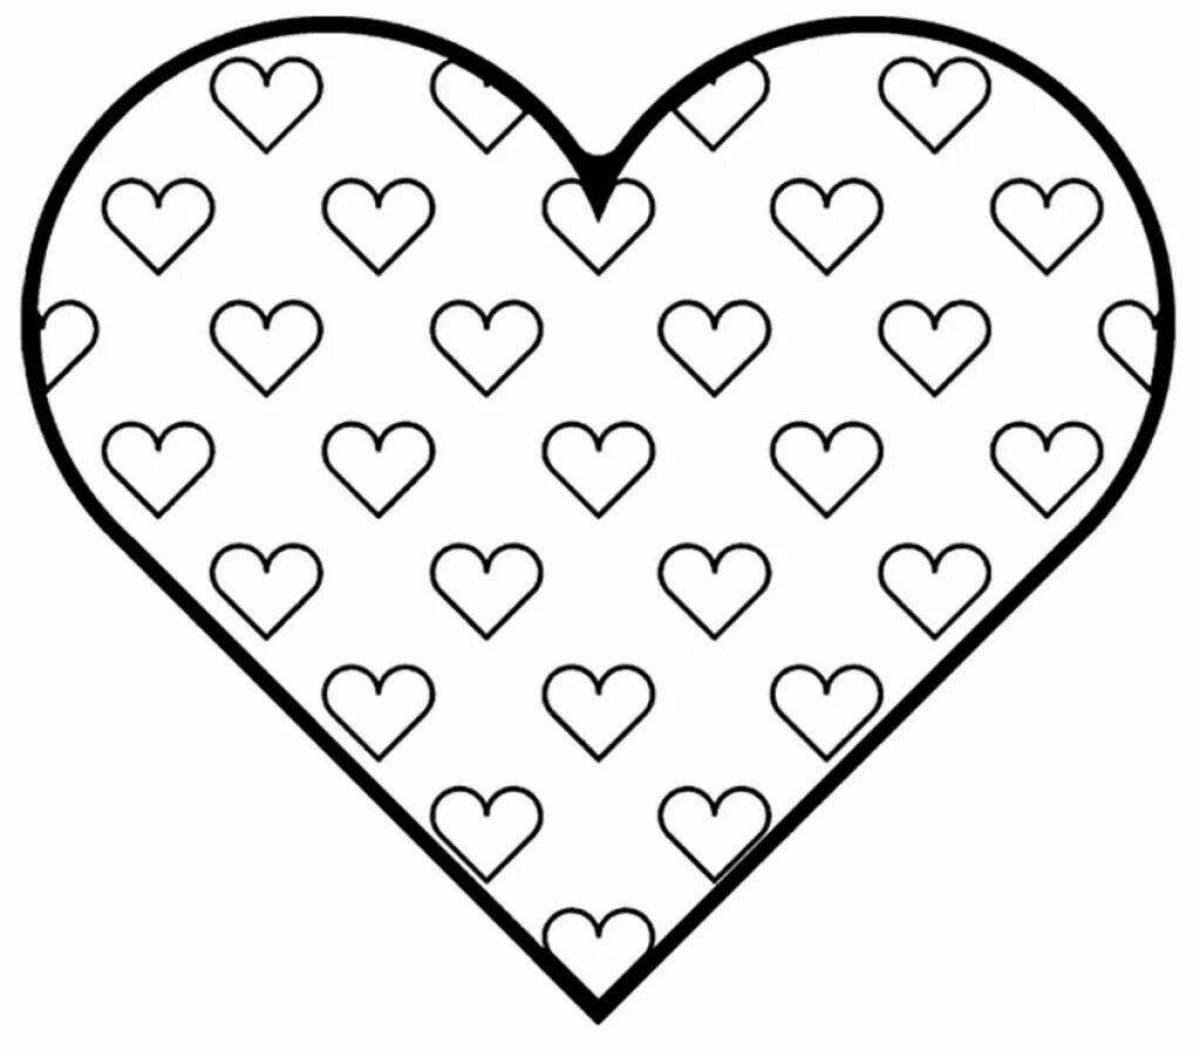 Charming heart coloring page